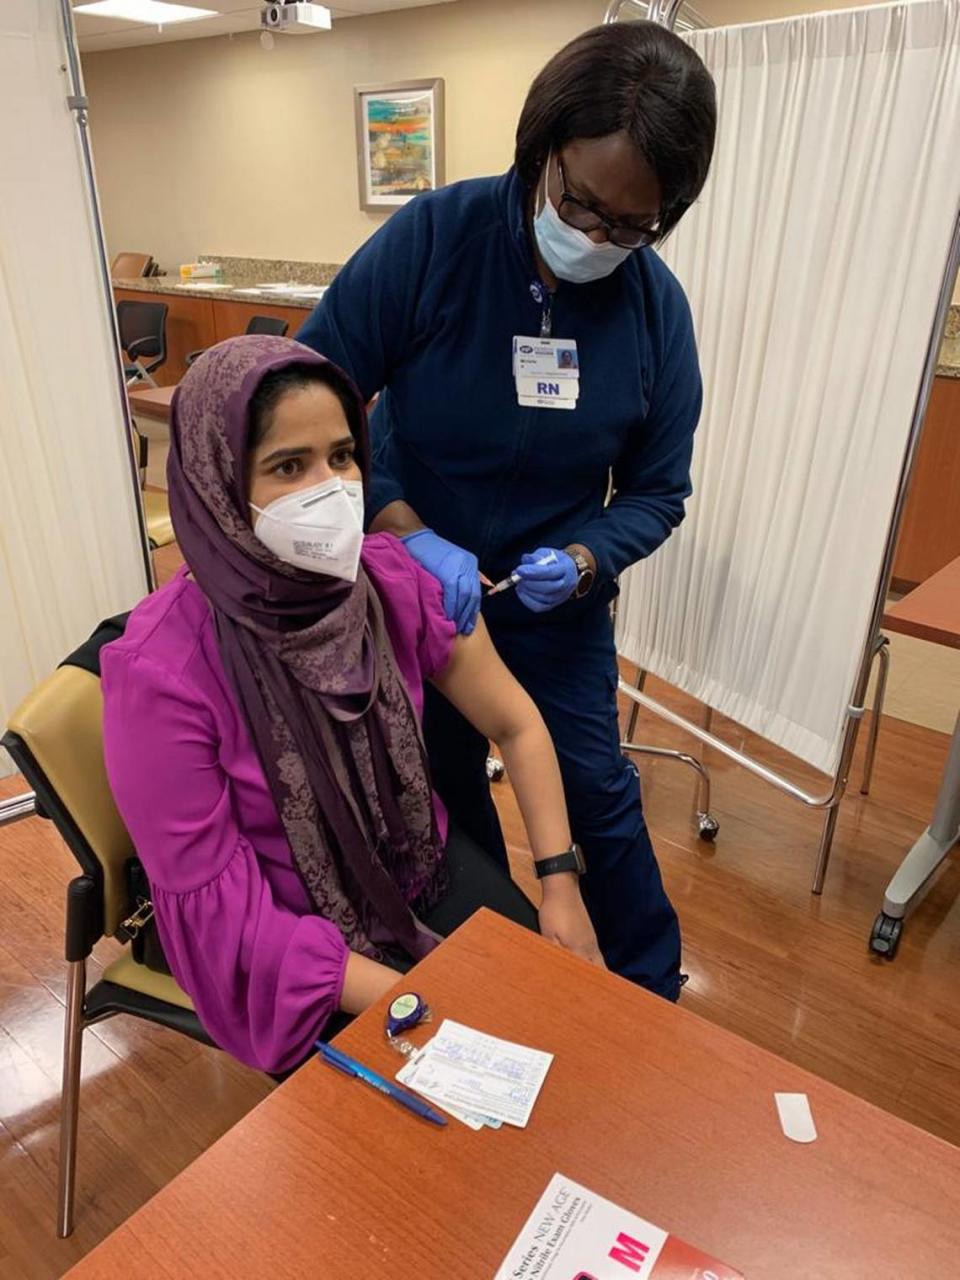 Tehsin Siddiqui, member of the Coalition of South Florida Muslim Organizations, gets her vaccine at Jackson South. Siddiqui helped organize vaccines through the Islamic Center of Greater Miami for about 25 people, some from the NUR Center, the domestic violence shelter in South Florida for Muslim women.